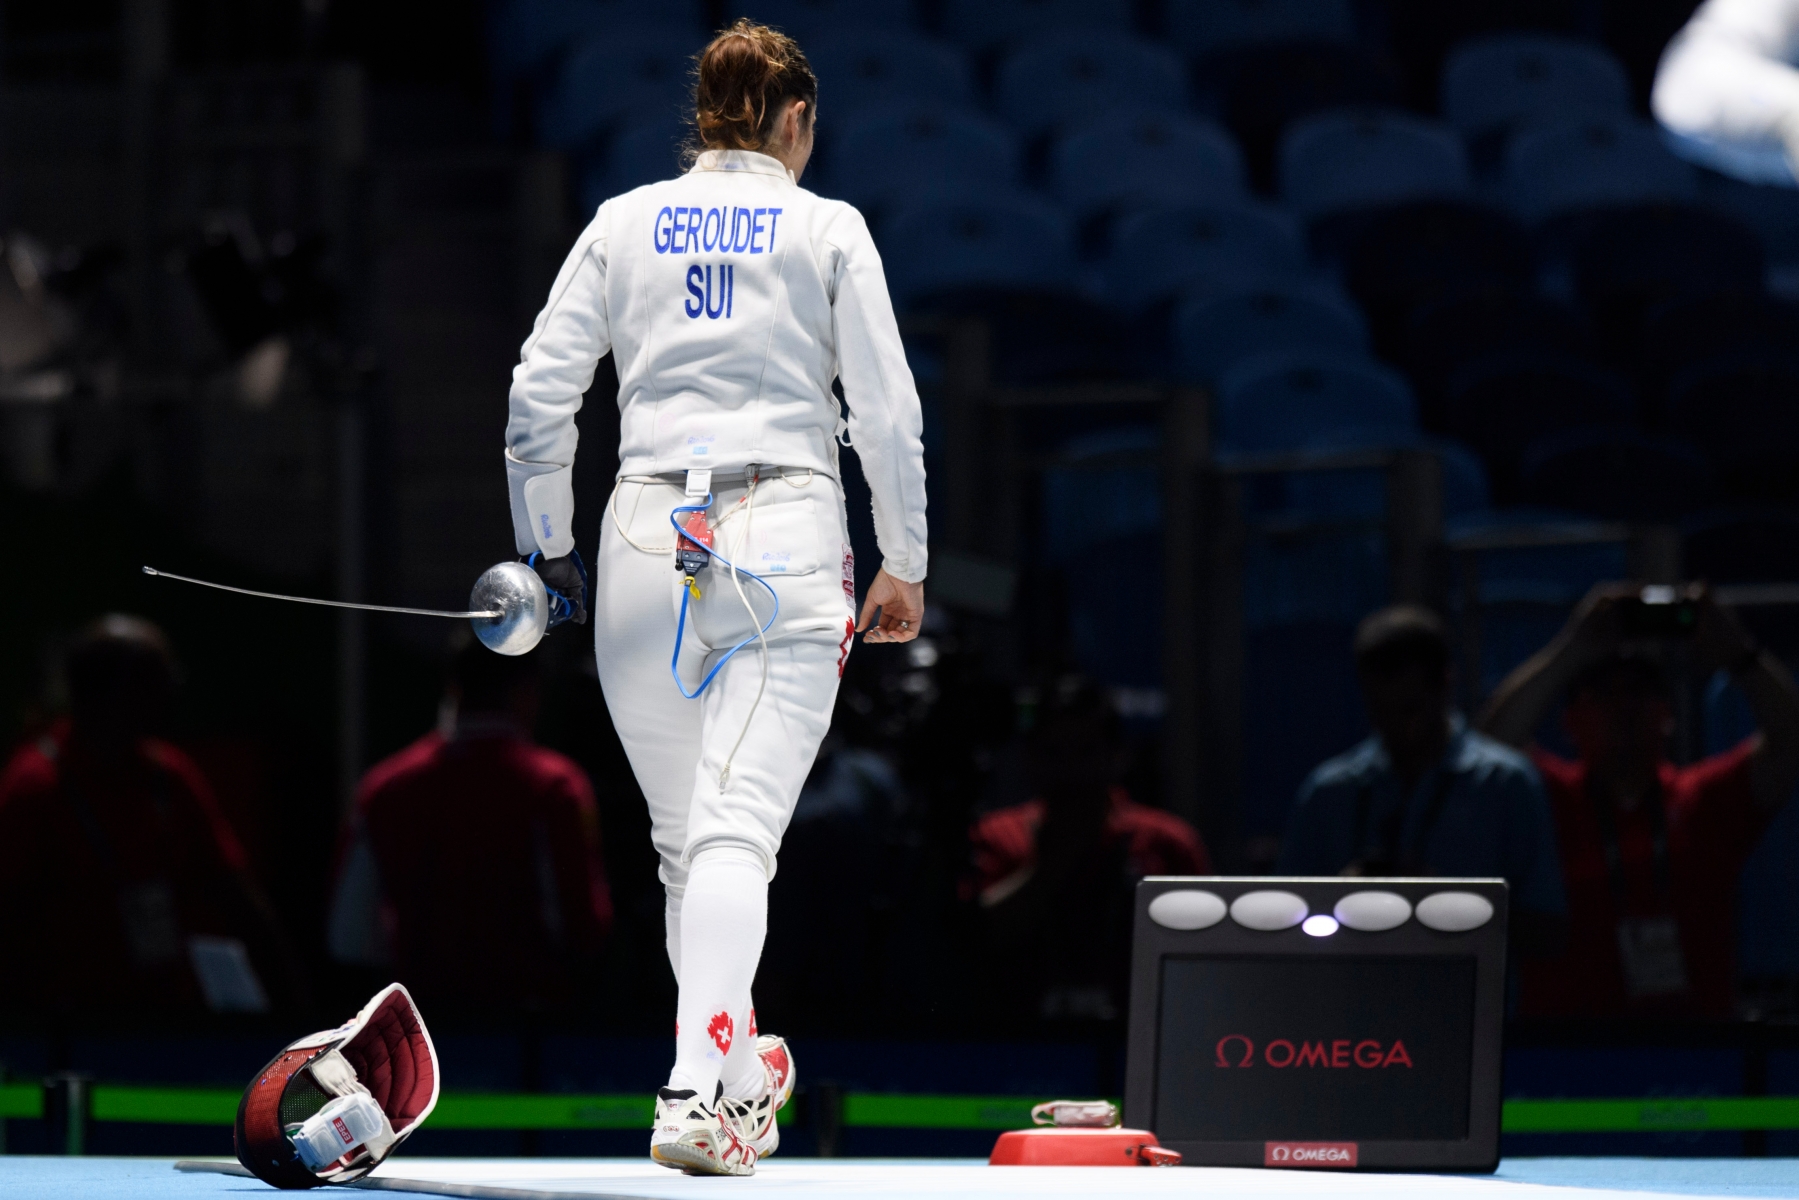 Tiffany Geroudet of Switzerland before competing against Rayssa Costa from Brazil in the women's epee individual round of 64 in the Carioca Arena 3 in Rio de Janeiro, Brazil, at the Rio 2016 Olympic Summer Games, pictured on Saturday, August 06, 2016. (KEYSTONE/Laurent Gillieron)géroudet BRAZIL RIO OLYMPICS 2016 FENCING EPEE